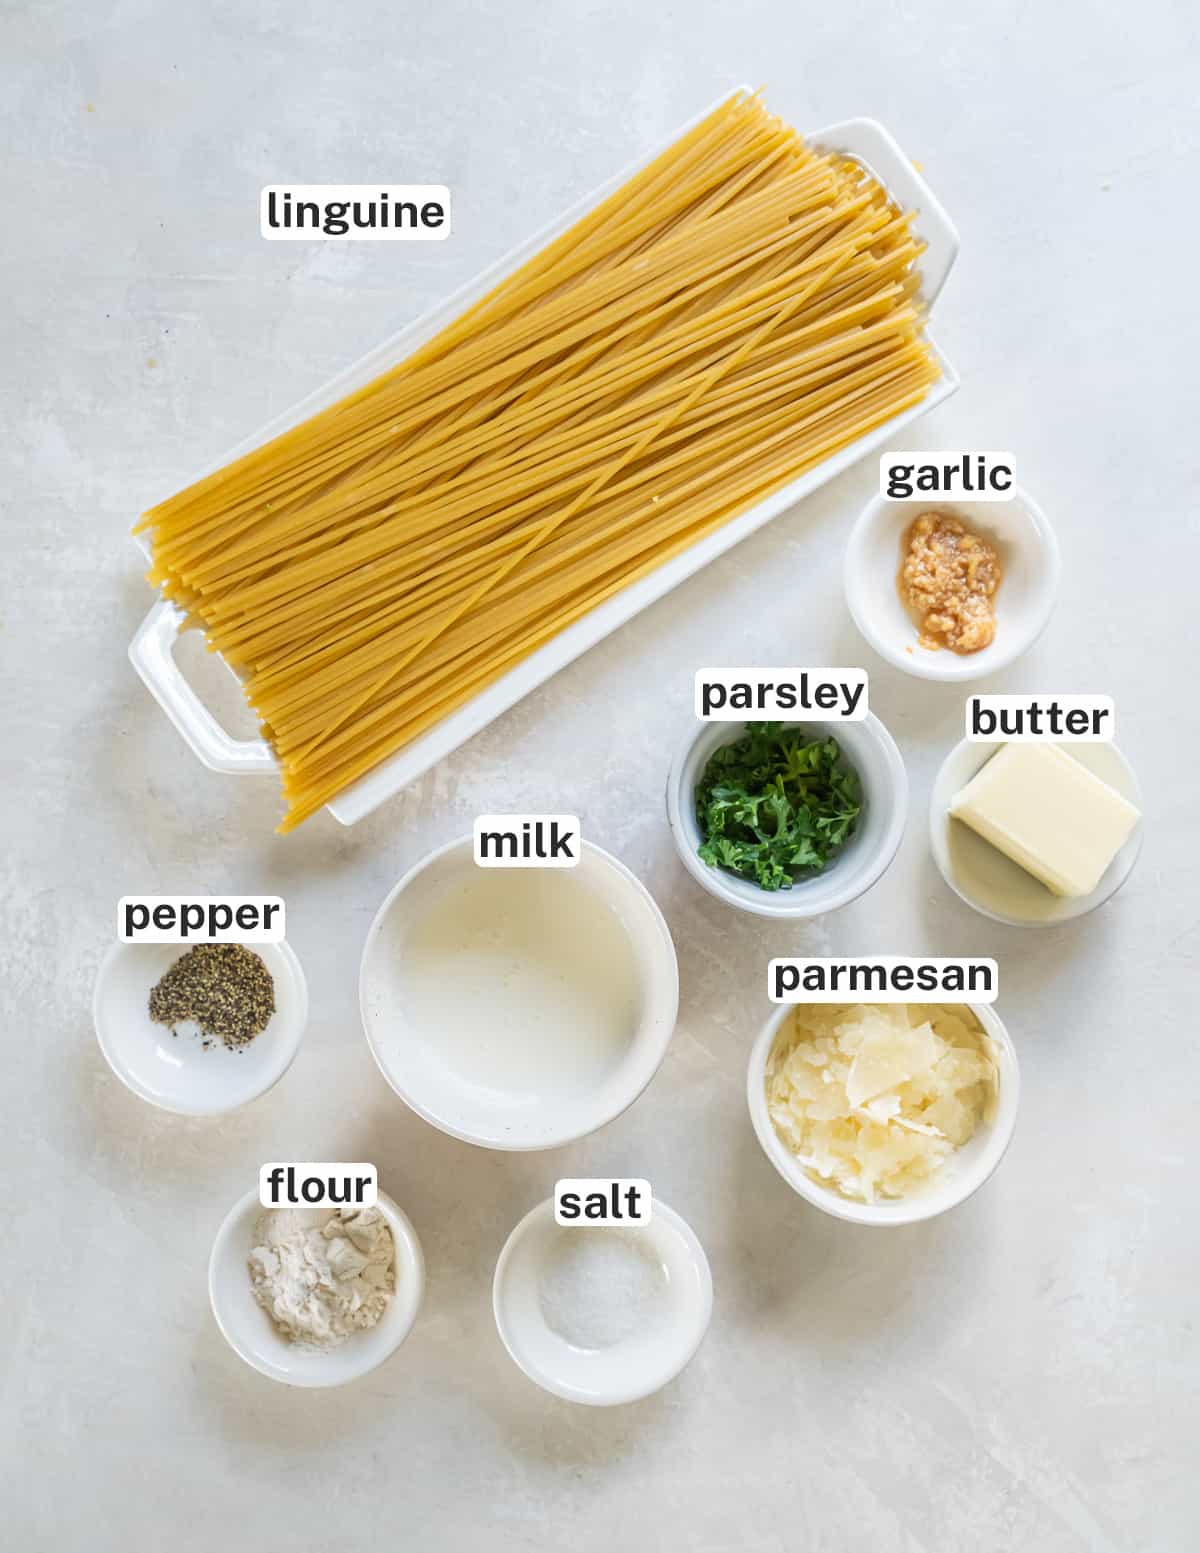 The ingredients for Parmesan Noodles with text.